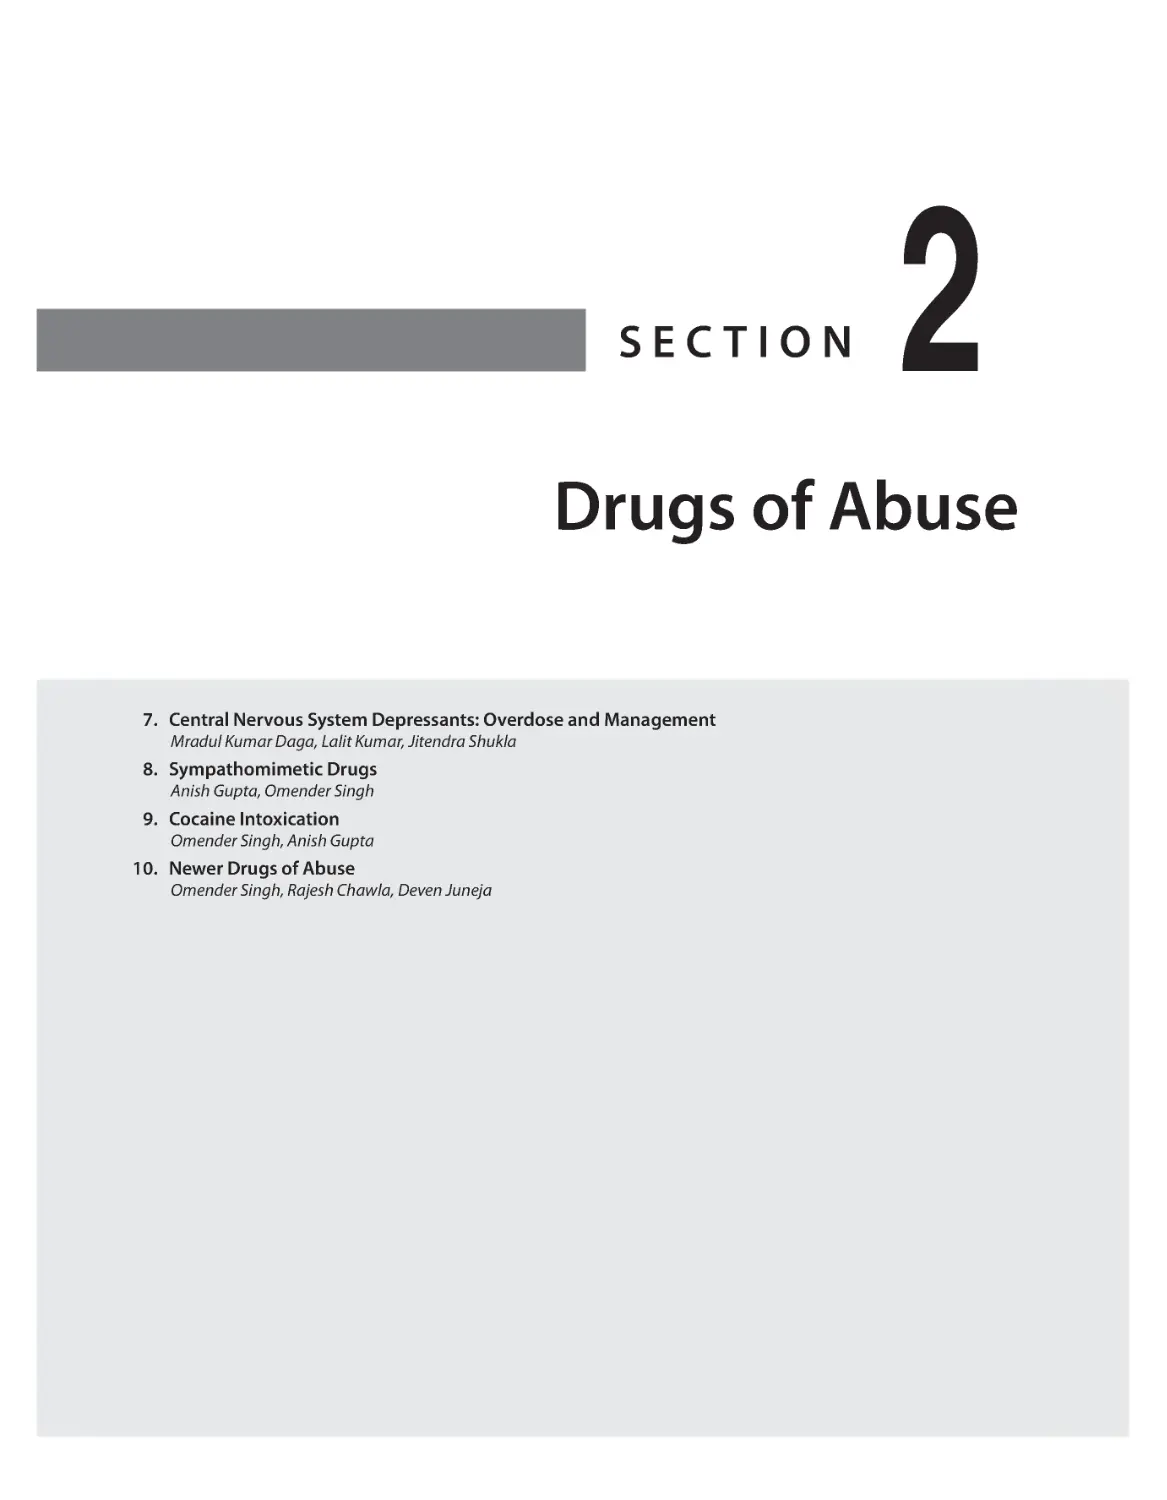 SECTION 2: Drugs of Abuse